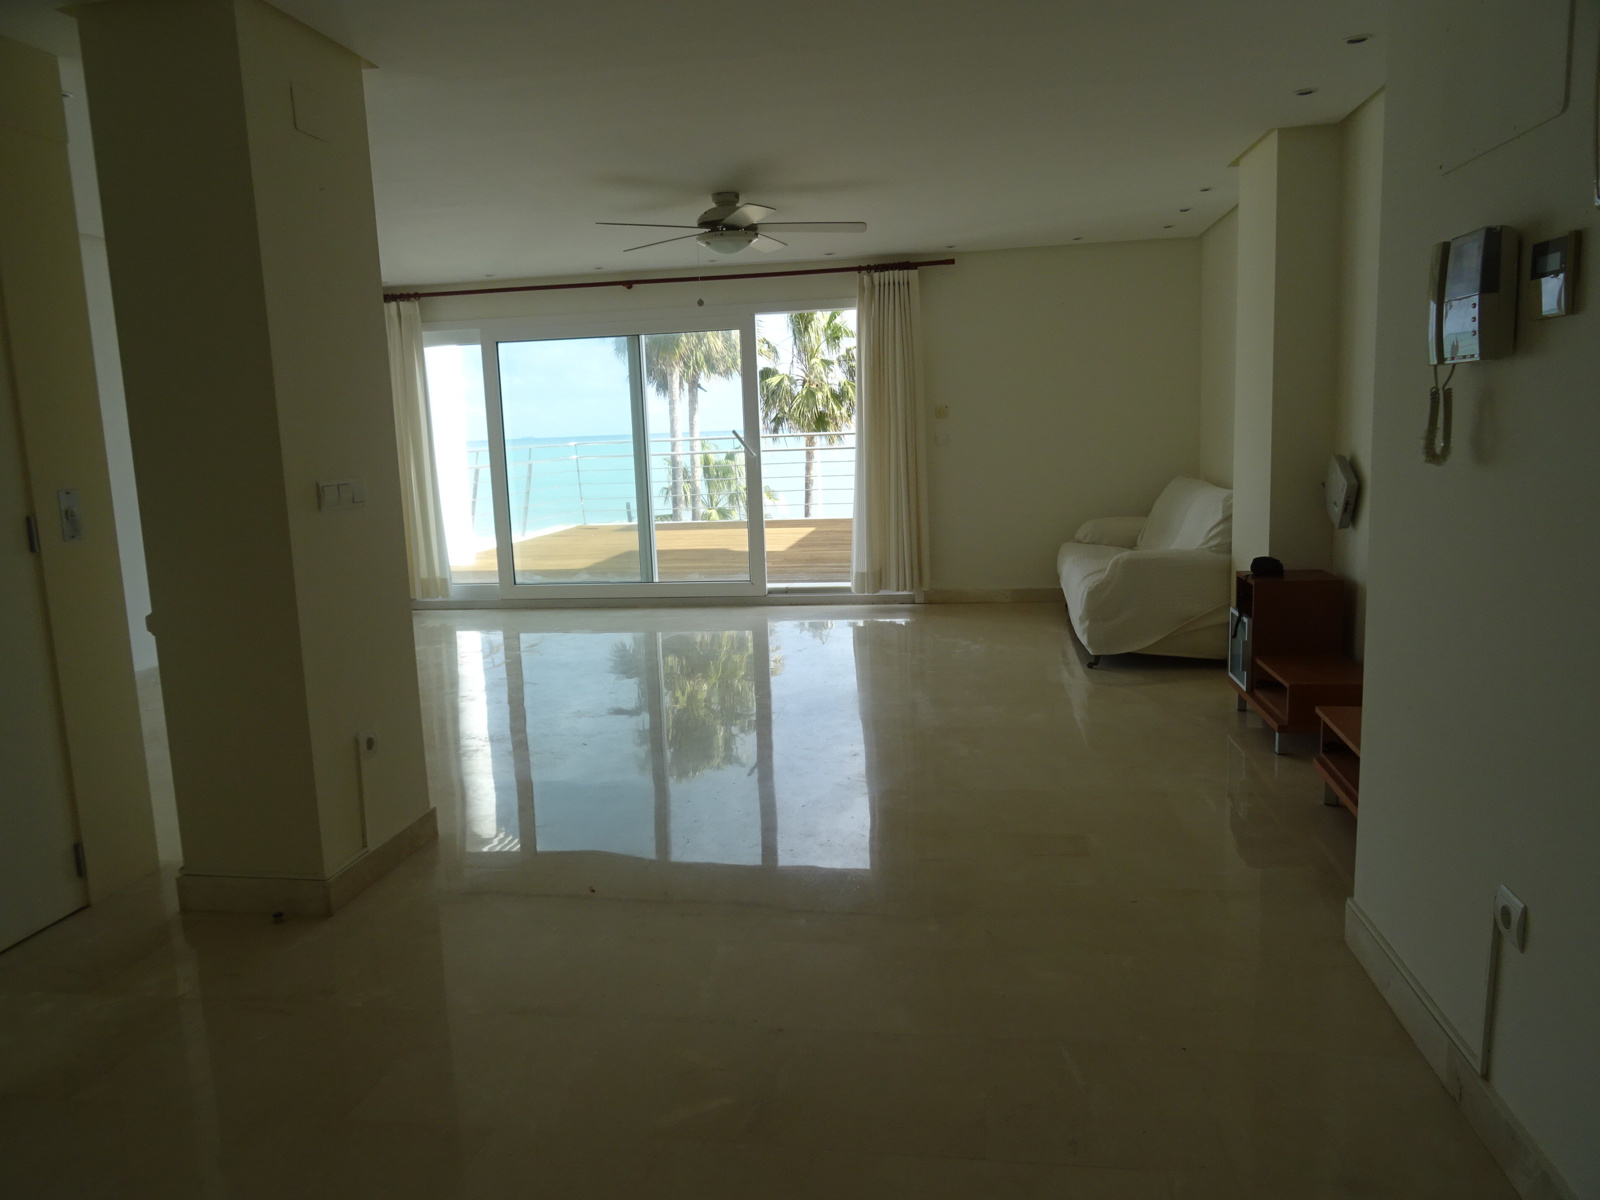 Penthouse-Duplex in front of the Arenal